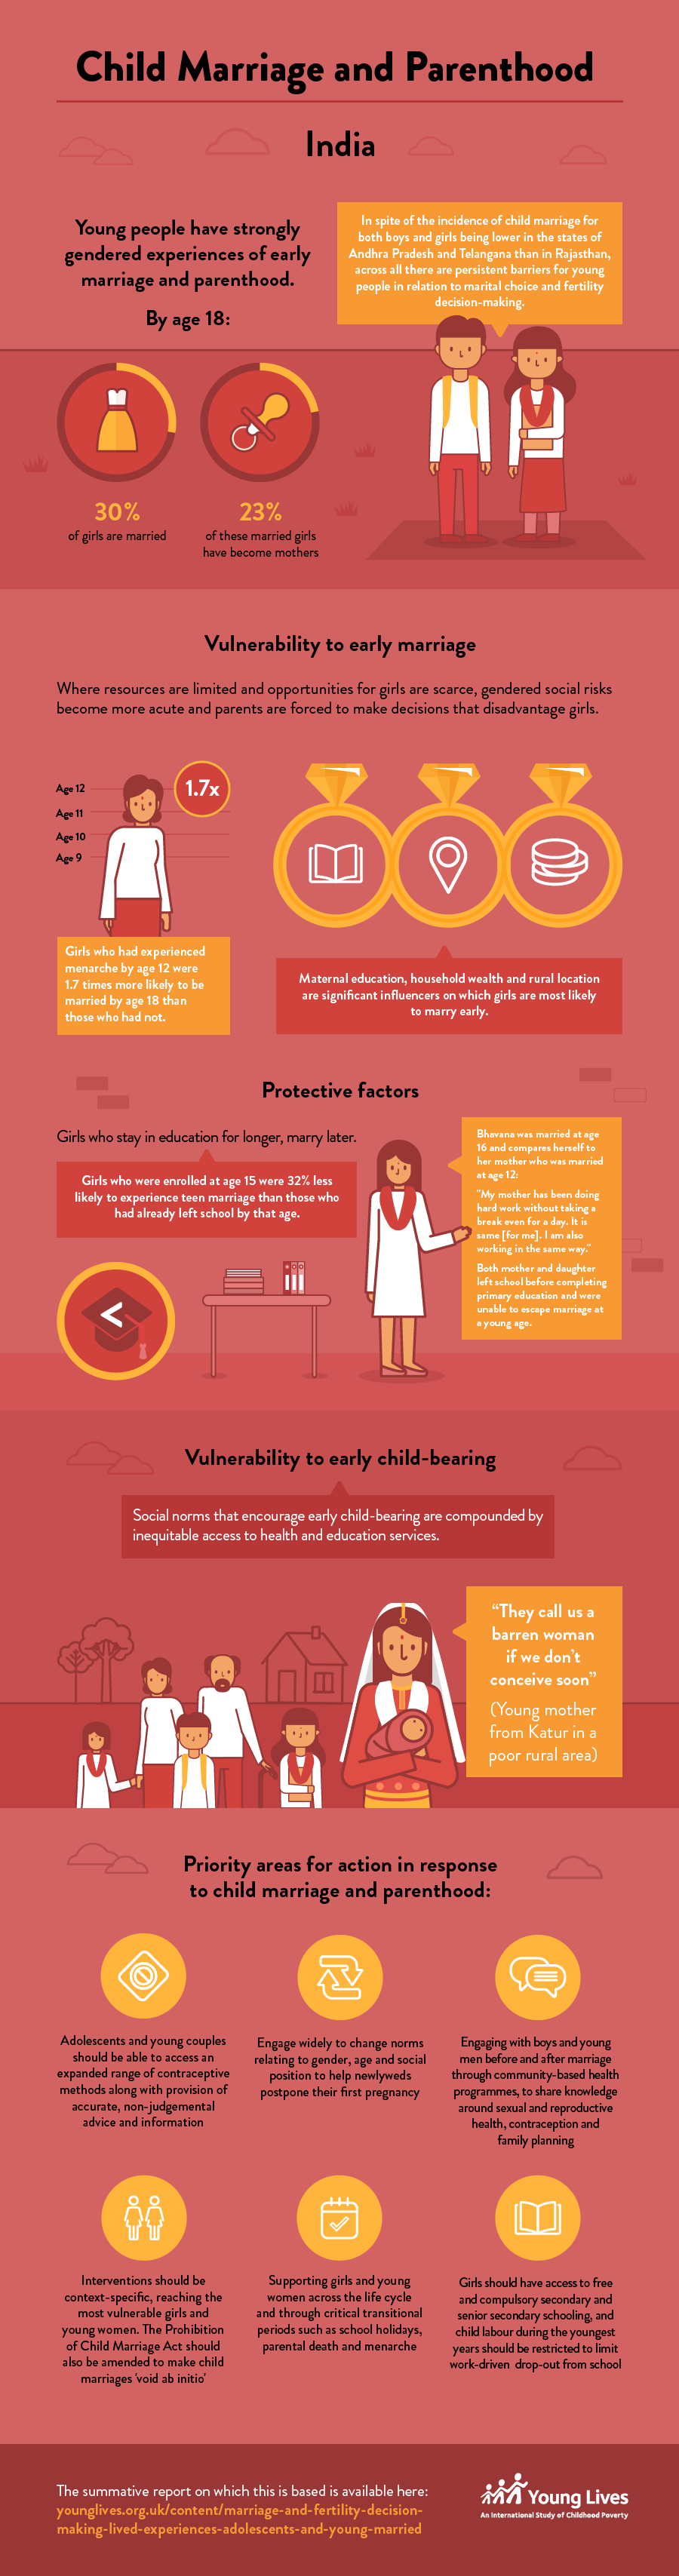 Child Marriage and Parenthood India infographic